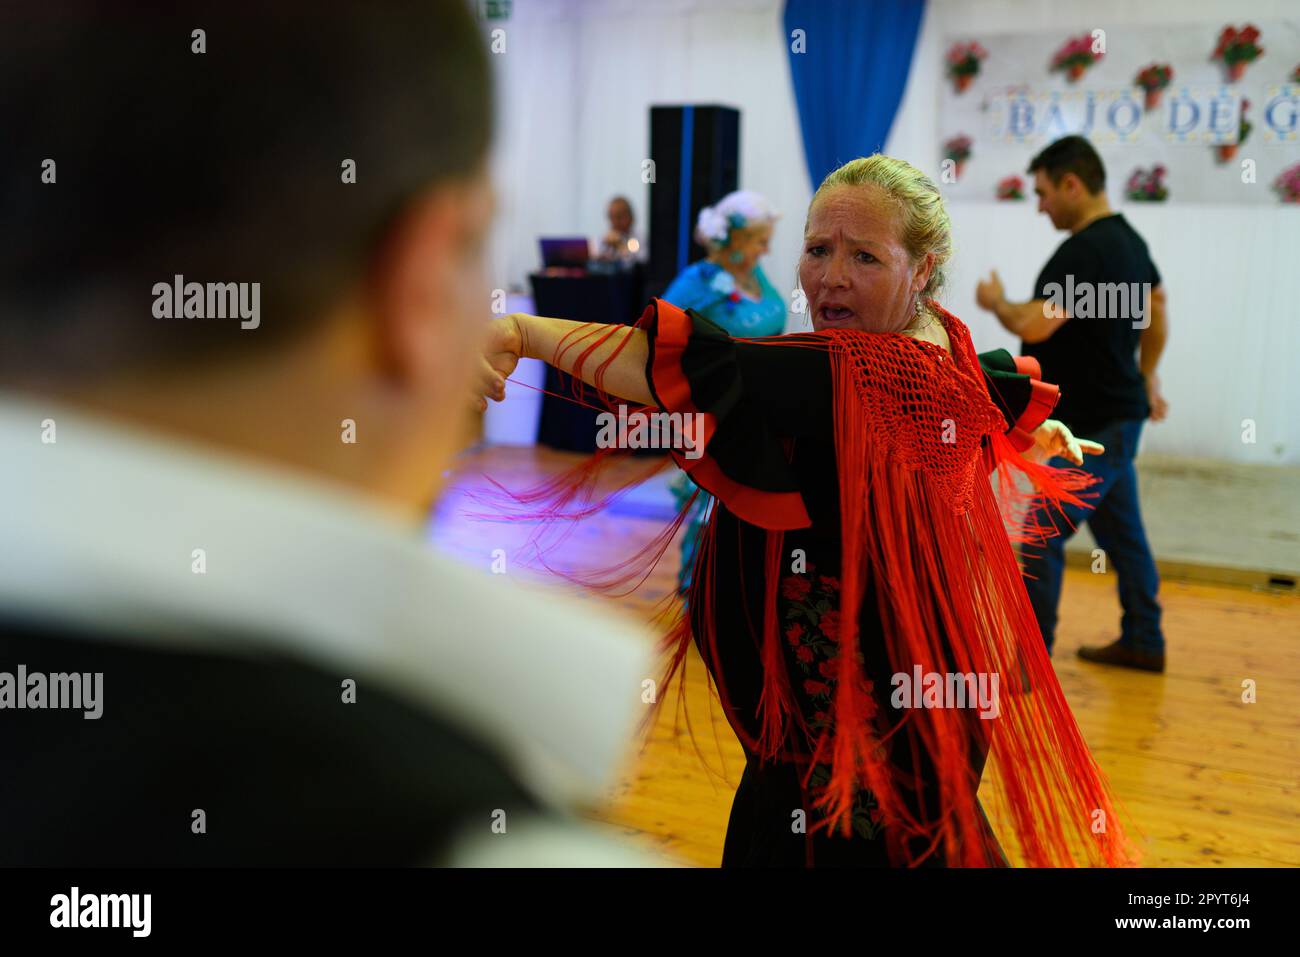 A woman in traditional andalusian dress is seen dancing flamenco during celebrations for the 'Feria de Abril' fair in the Forum Park. The fair, know a Stock Photo